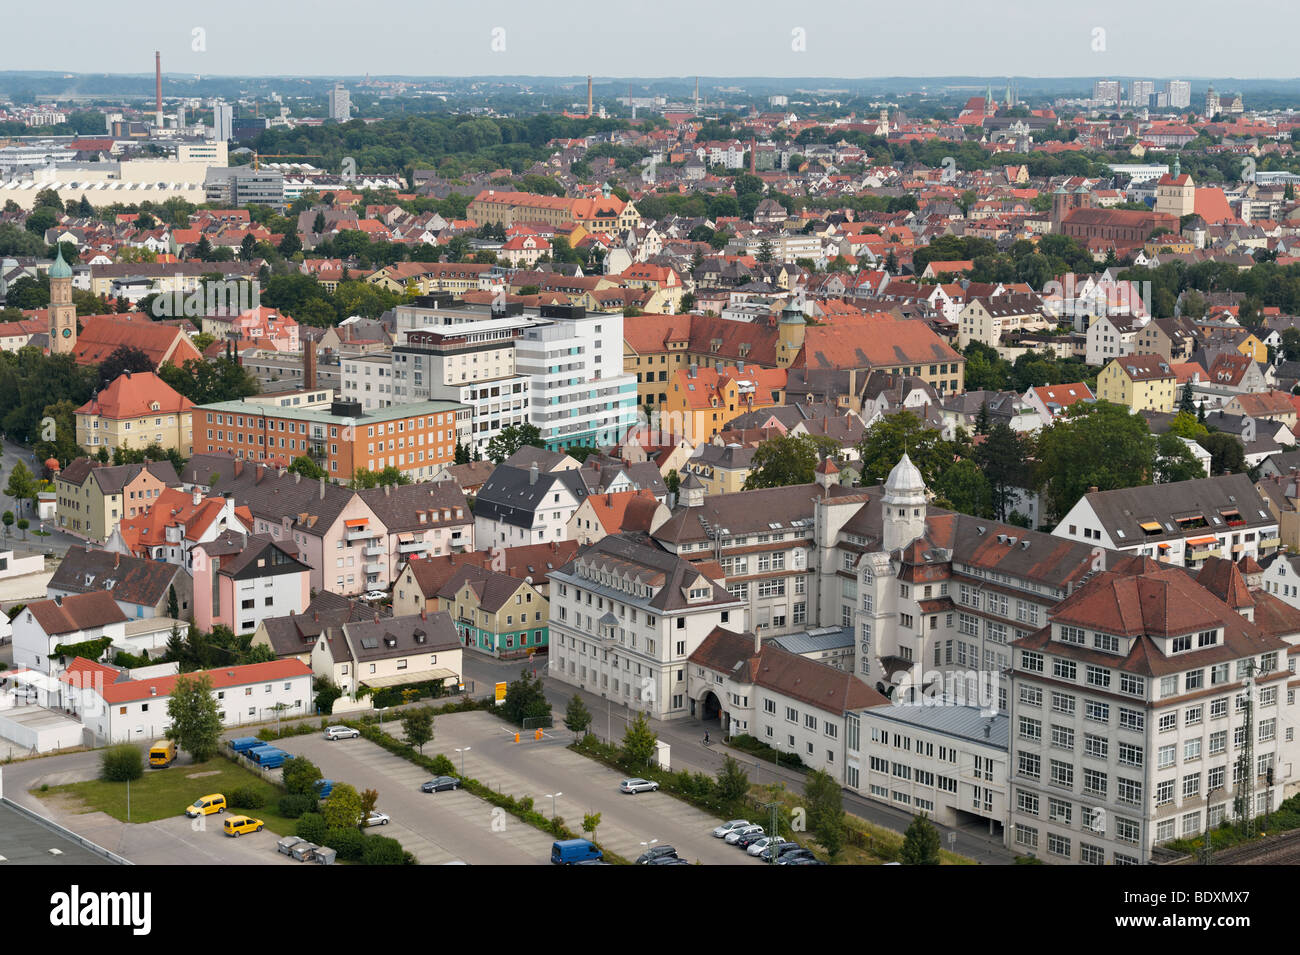 View over Augsburg with the former boot factory Wessels in foreground, Augsburg, Swabia, Bavaria, Germany Stock Photo